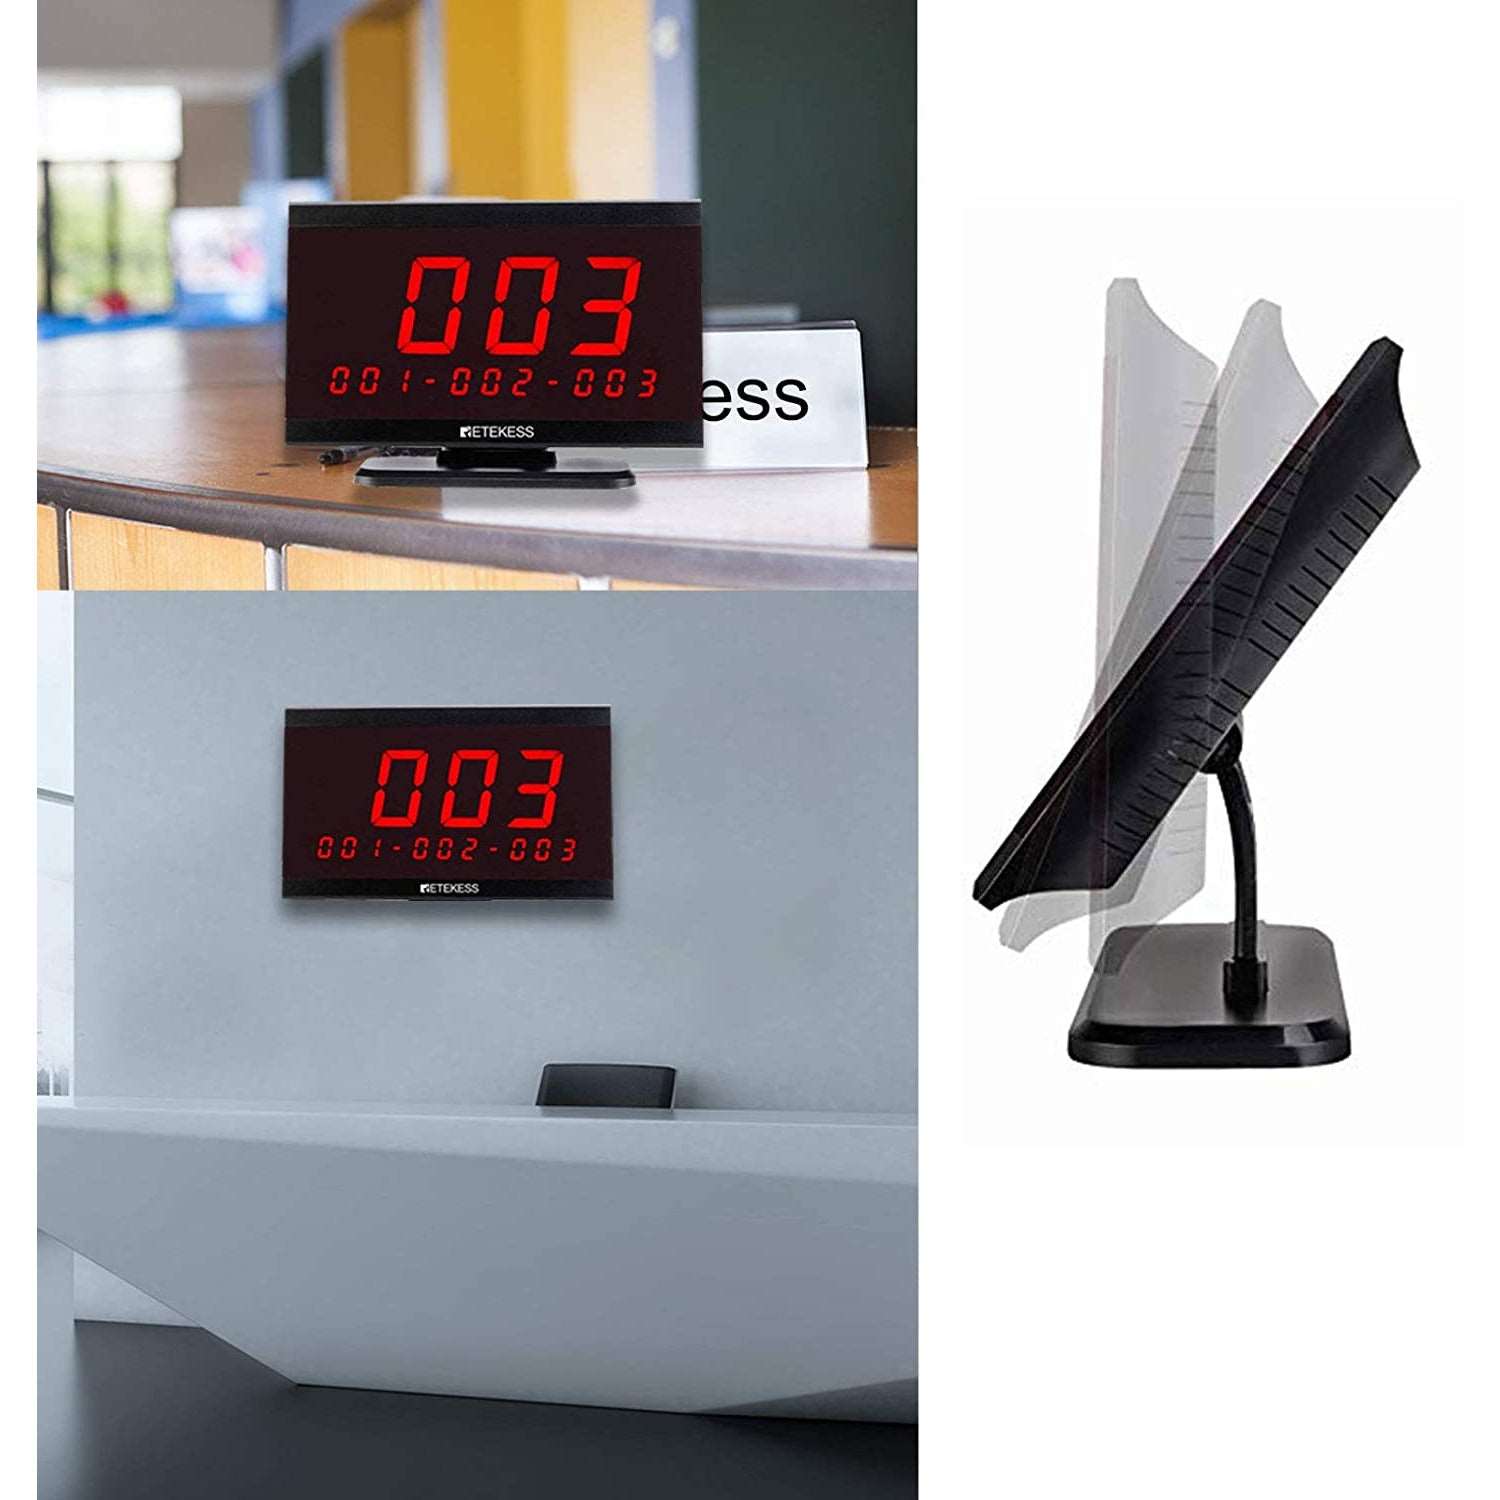 Retekess T128 Pager System, Wireless Calling System Voice Broadcast Modes, Watch Standby 36 Hours for Restaurant Bar.